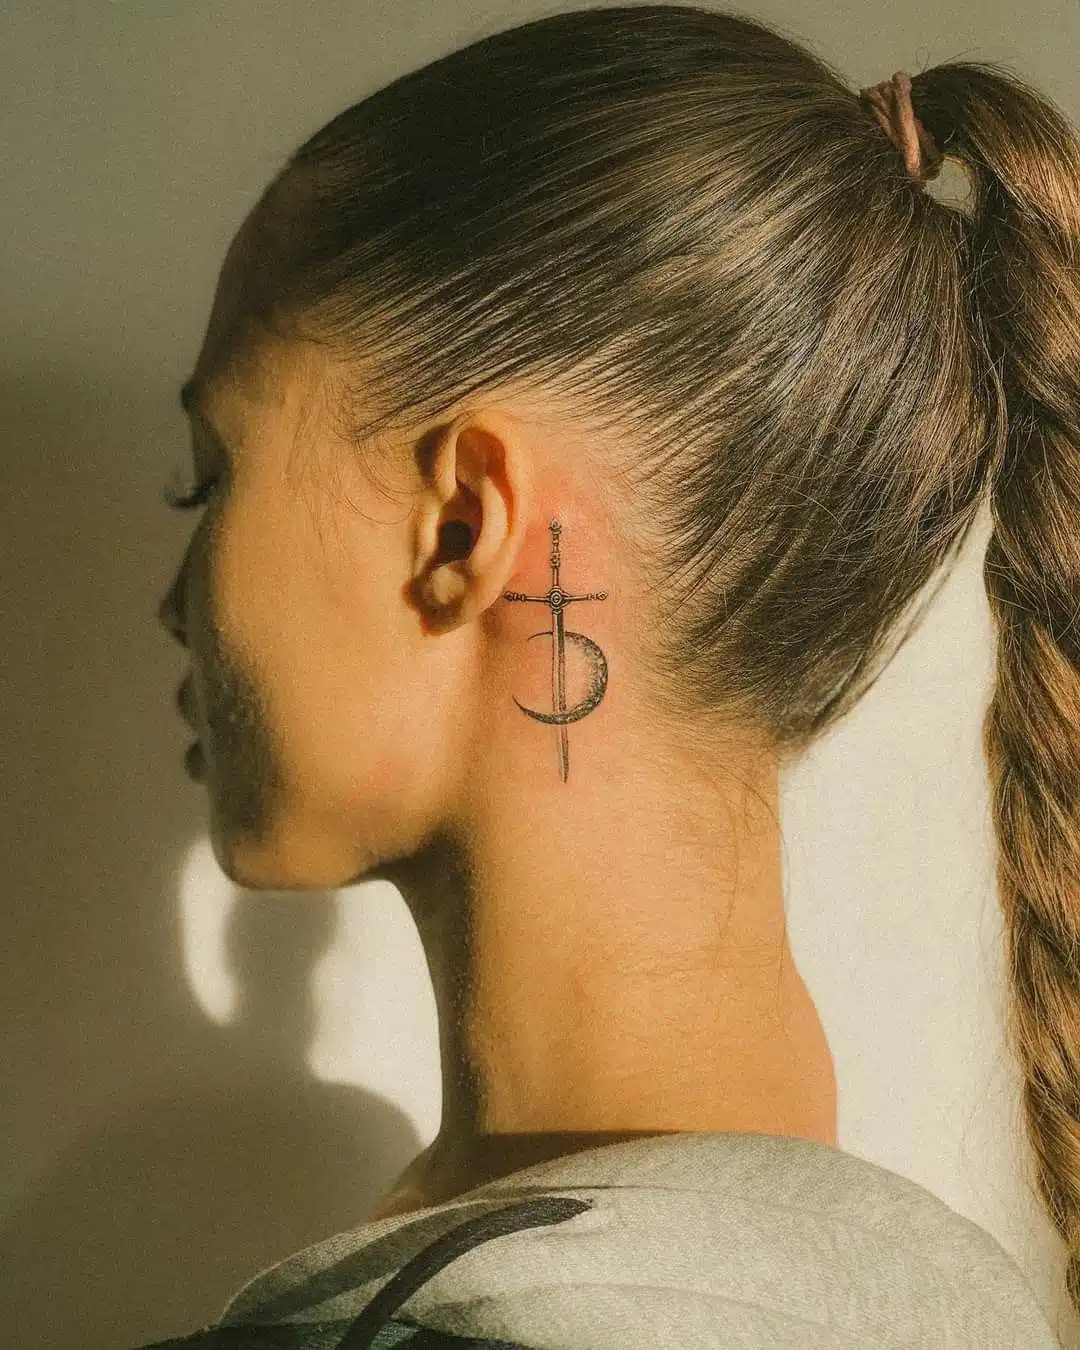 Behind the ear tattoo placement ideas for women